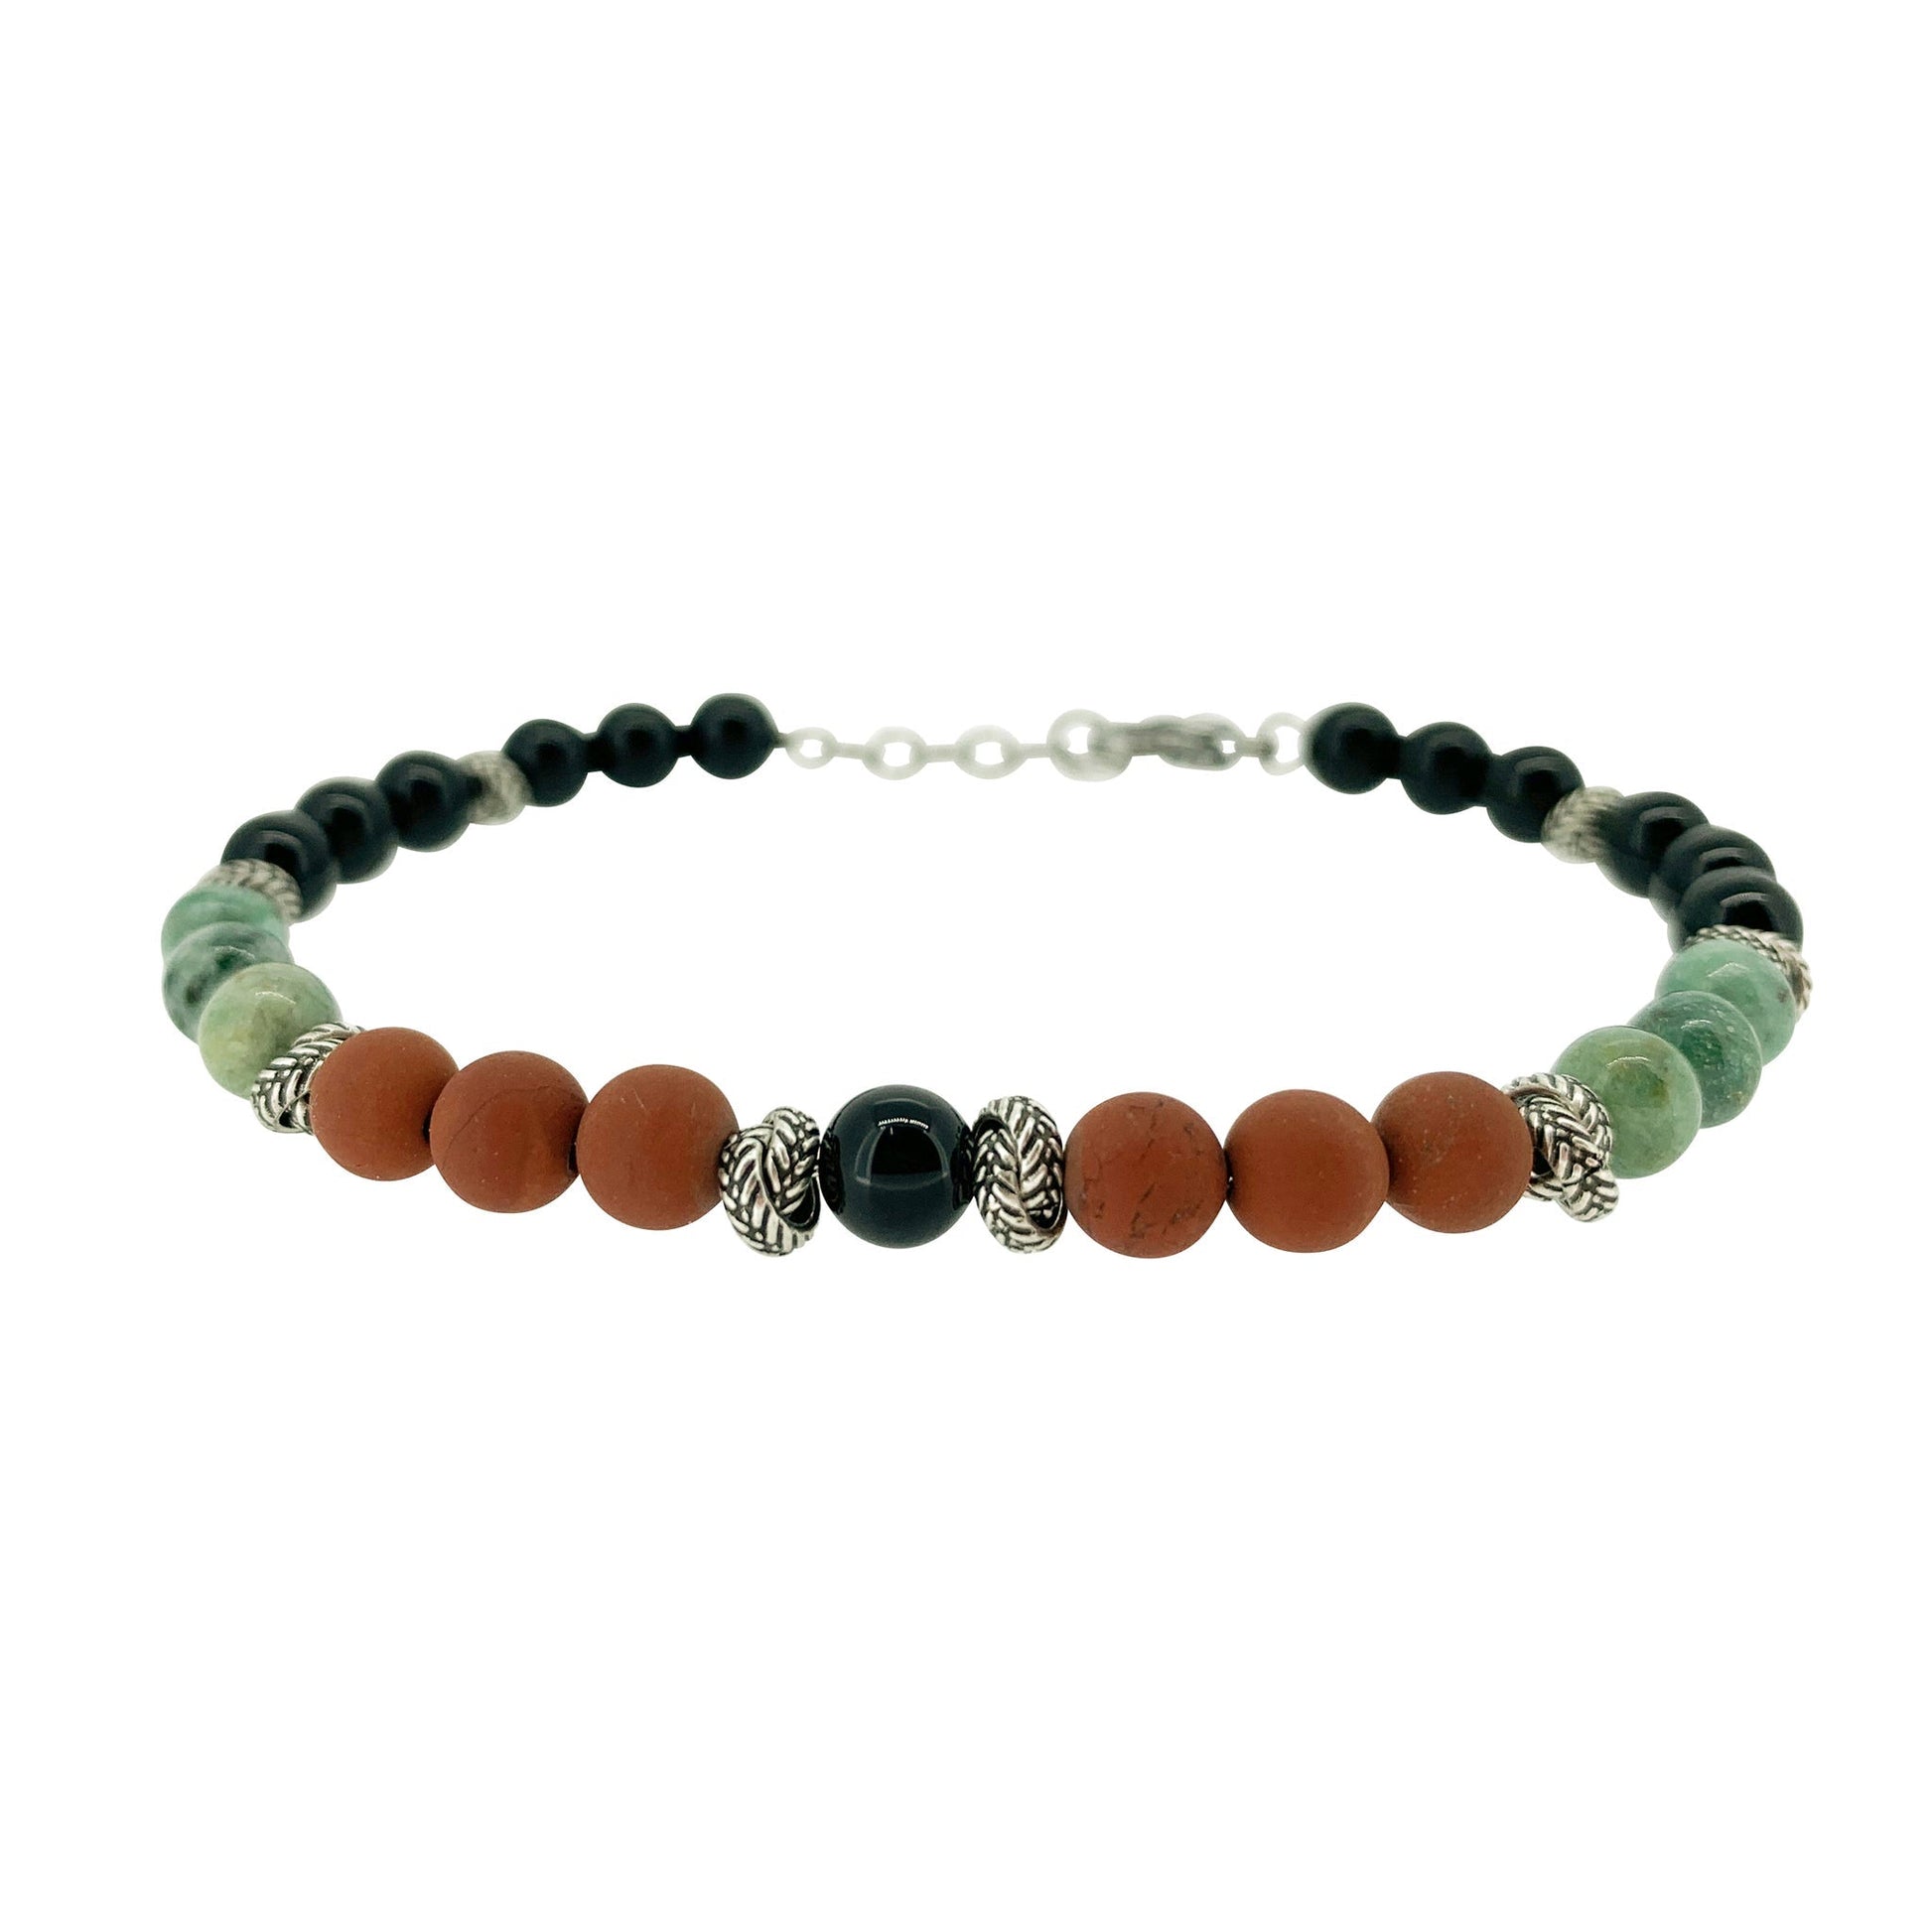 A multicolored beaded stone bracelet displayed on a neutral white background.